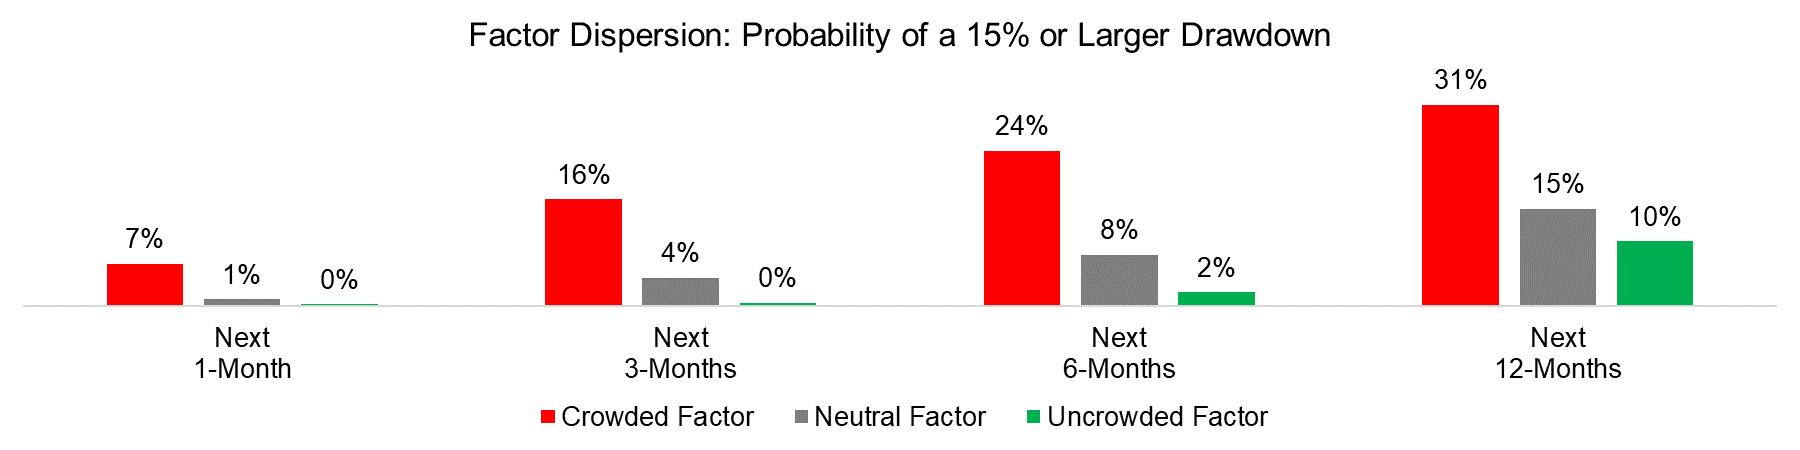 Factor Dispersion Probability of a 15% or Larger Drawdown